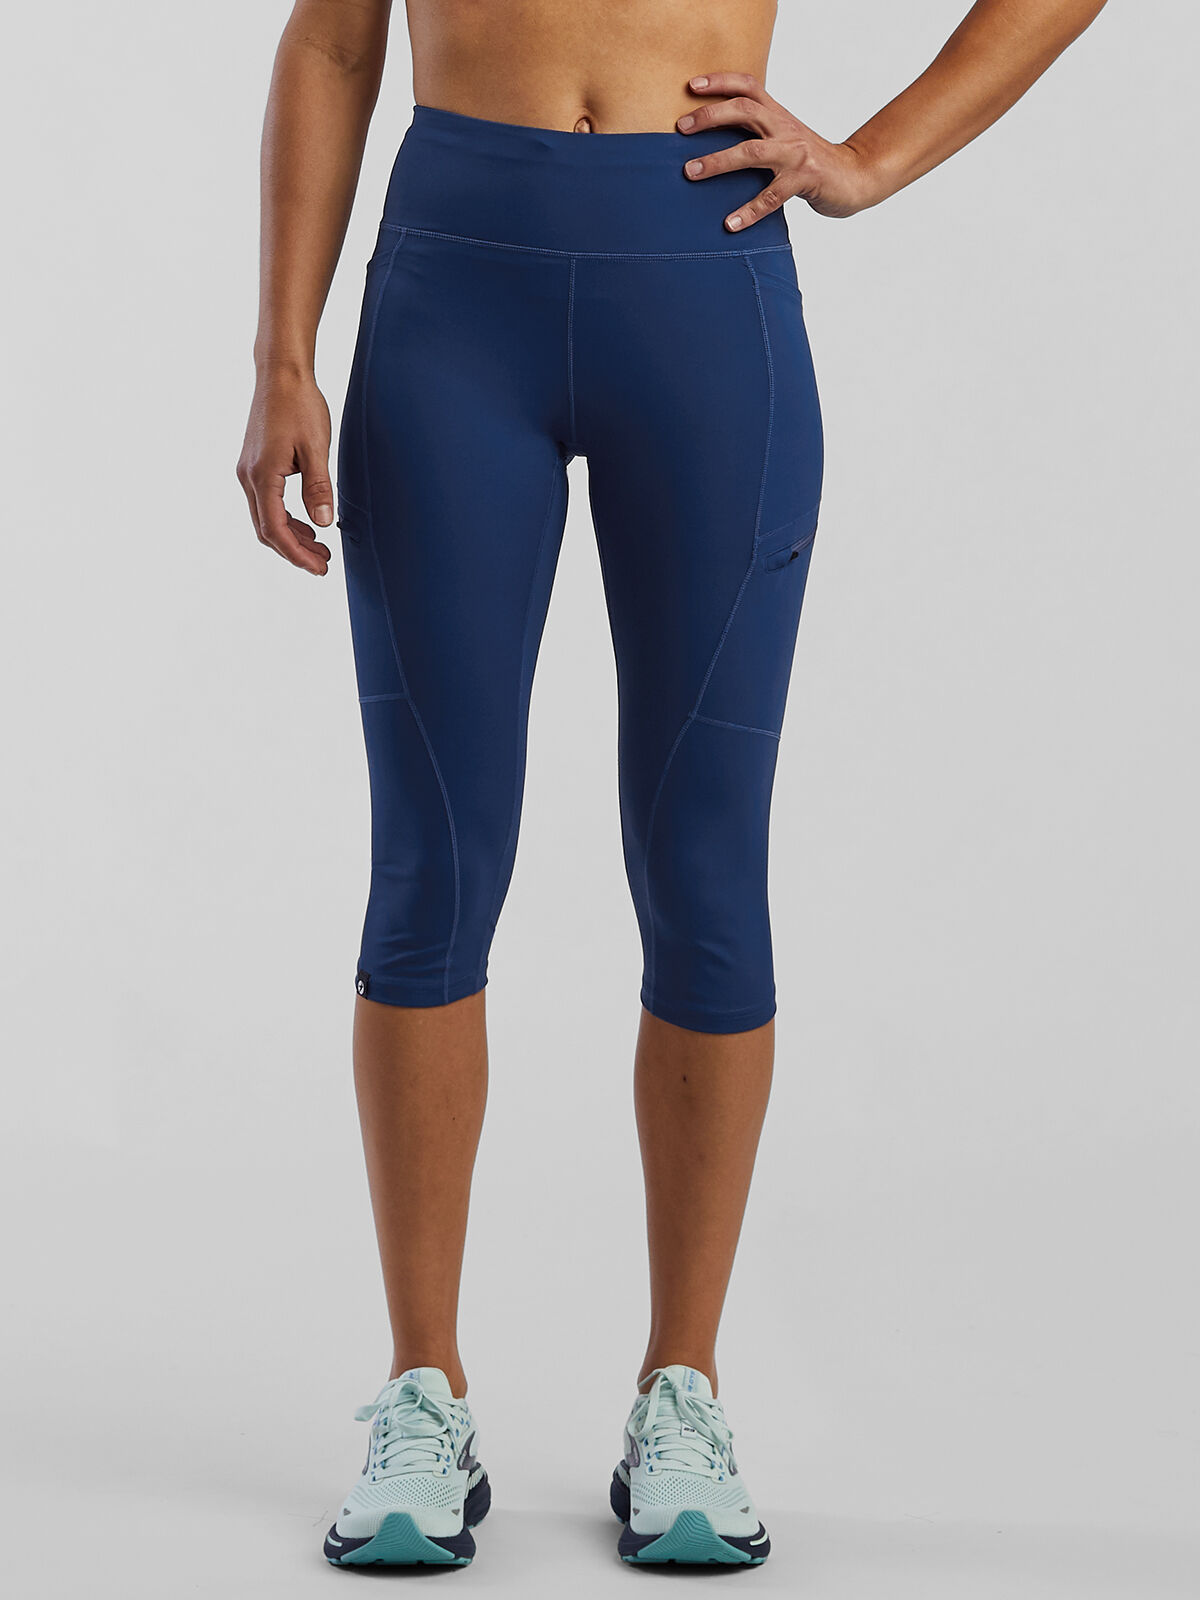 LOGO Layers by Lori Goldstein Petite Printed Crop Leggings with Pockets -  QVC.com